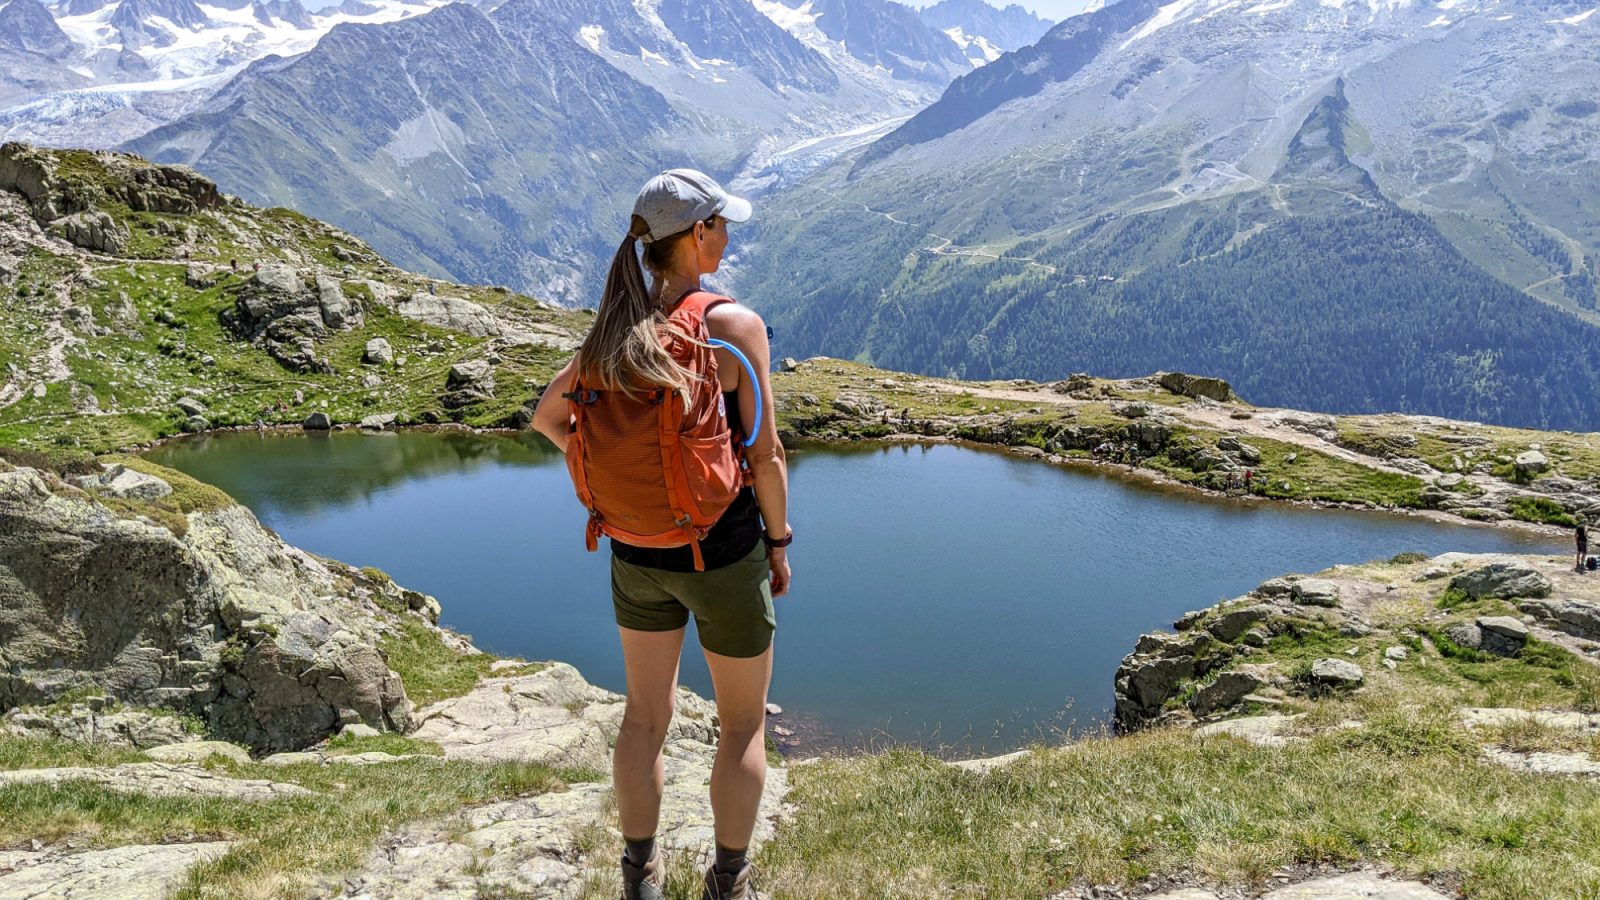 me standing on the edge of a mountain in front of a lake with an orange backpack